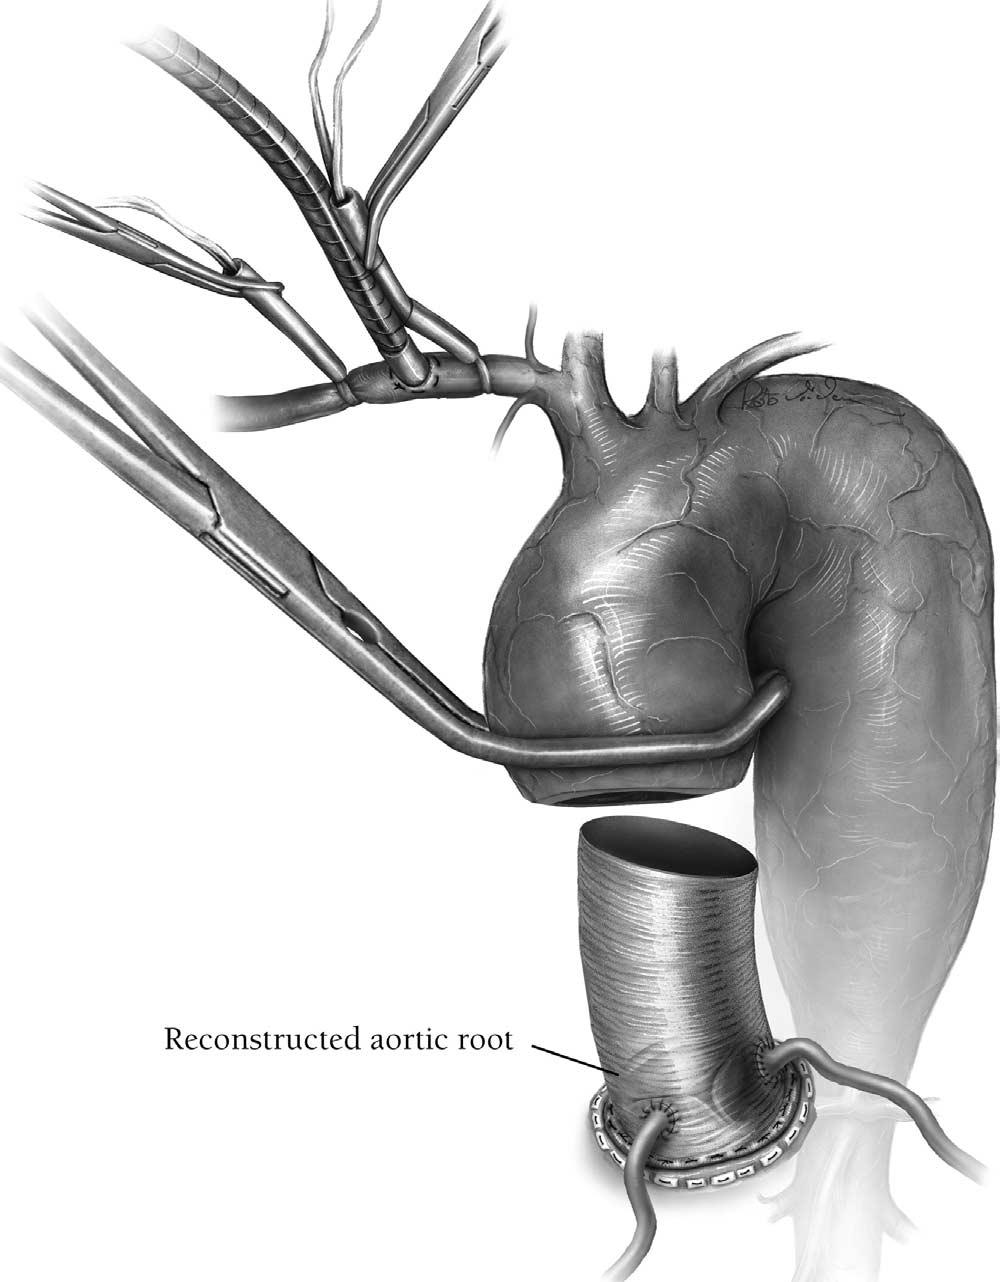 Aortic arch replacement/selective antegrade perfusion 27 Figure 4 In patients with significant aortic valve insufficiency or with the necessity of aortic root reconstruction, the ascending aorta is